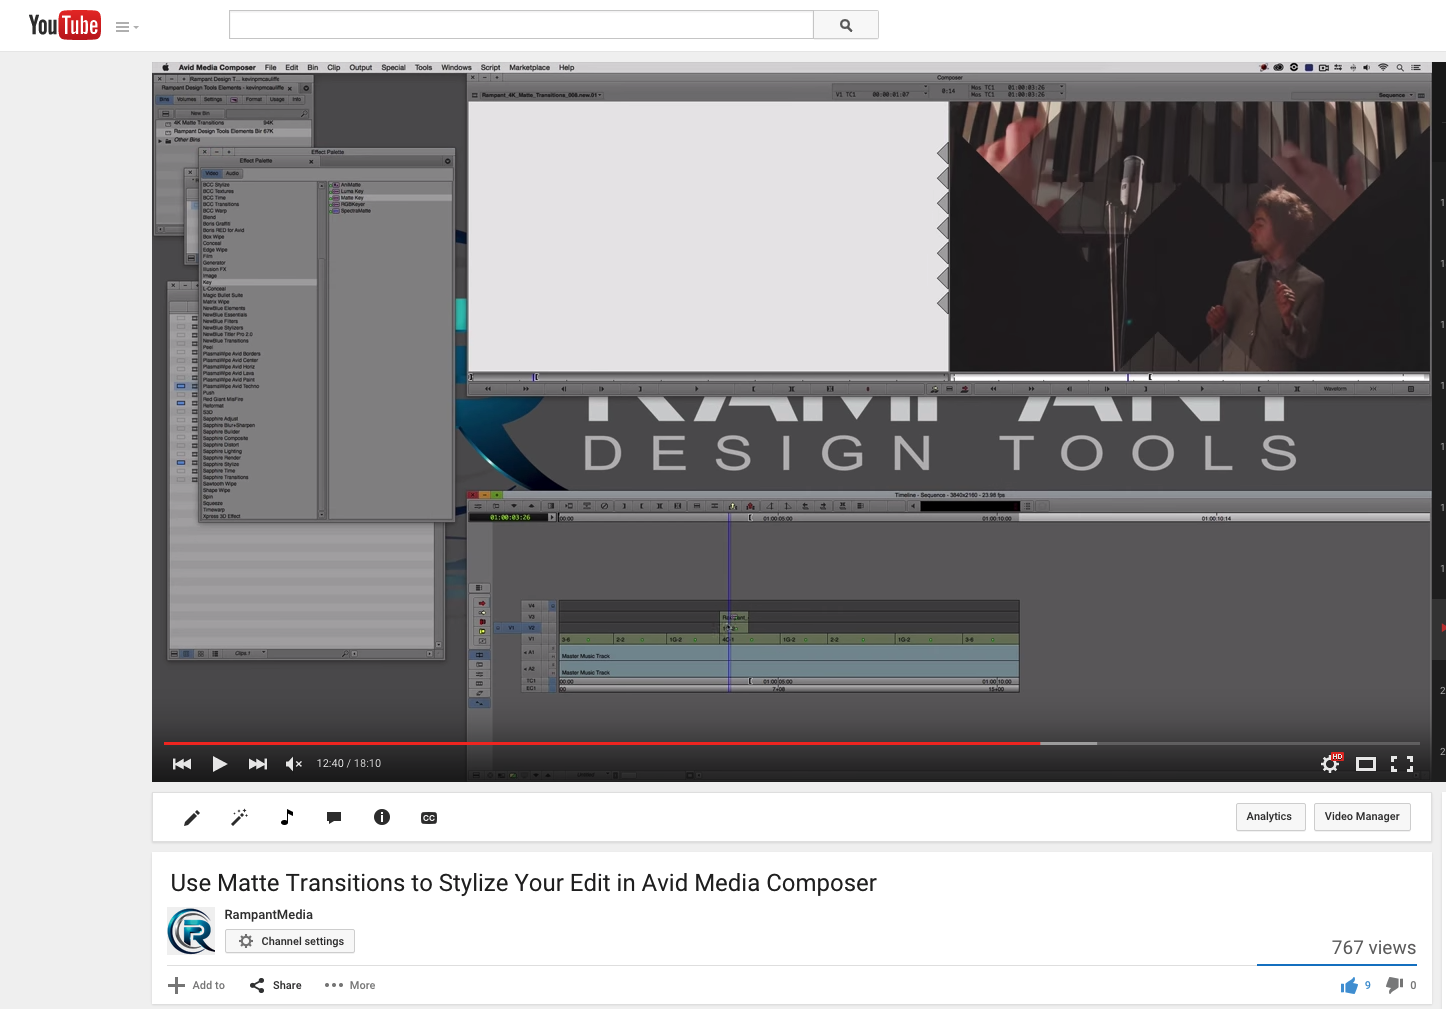 Use Matte Transitions to Stylize Your Edit in Avid Media Composer